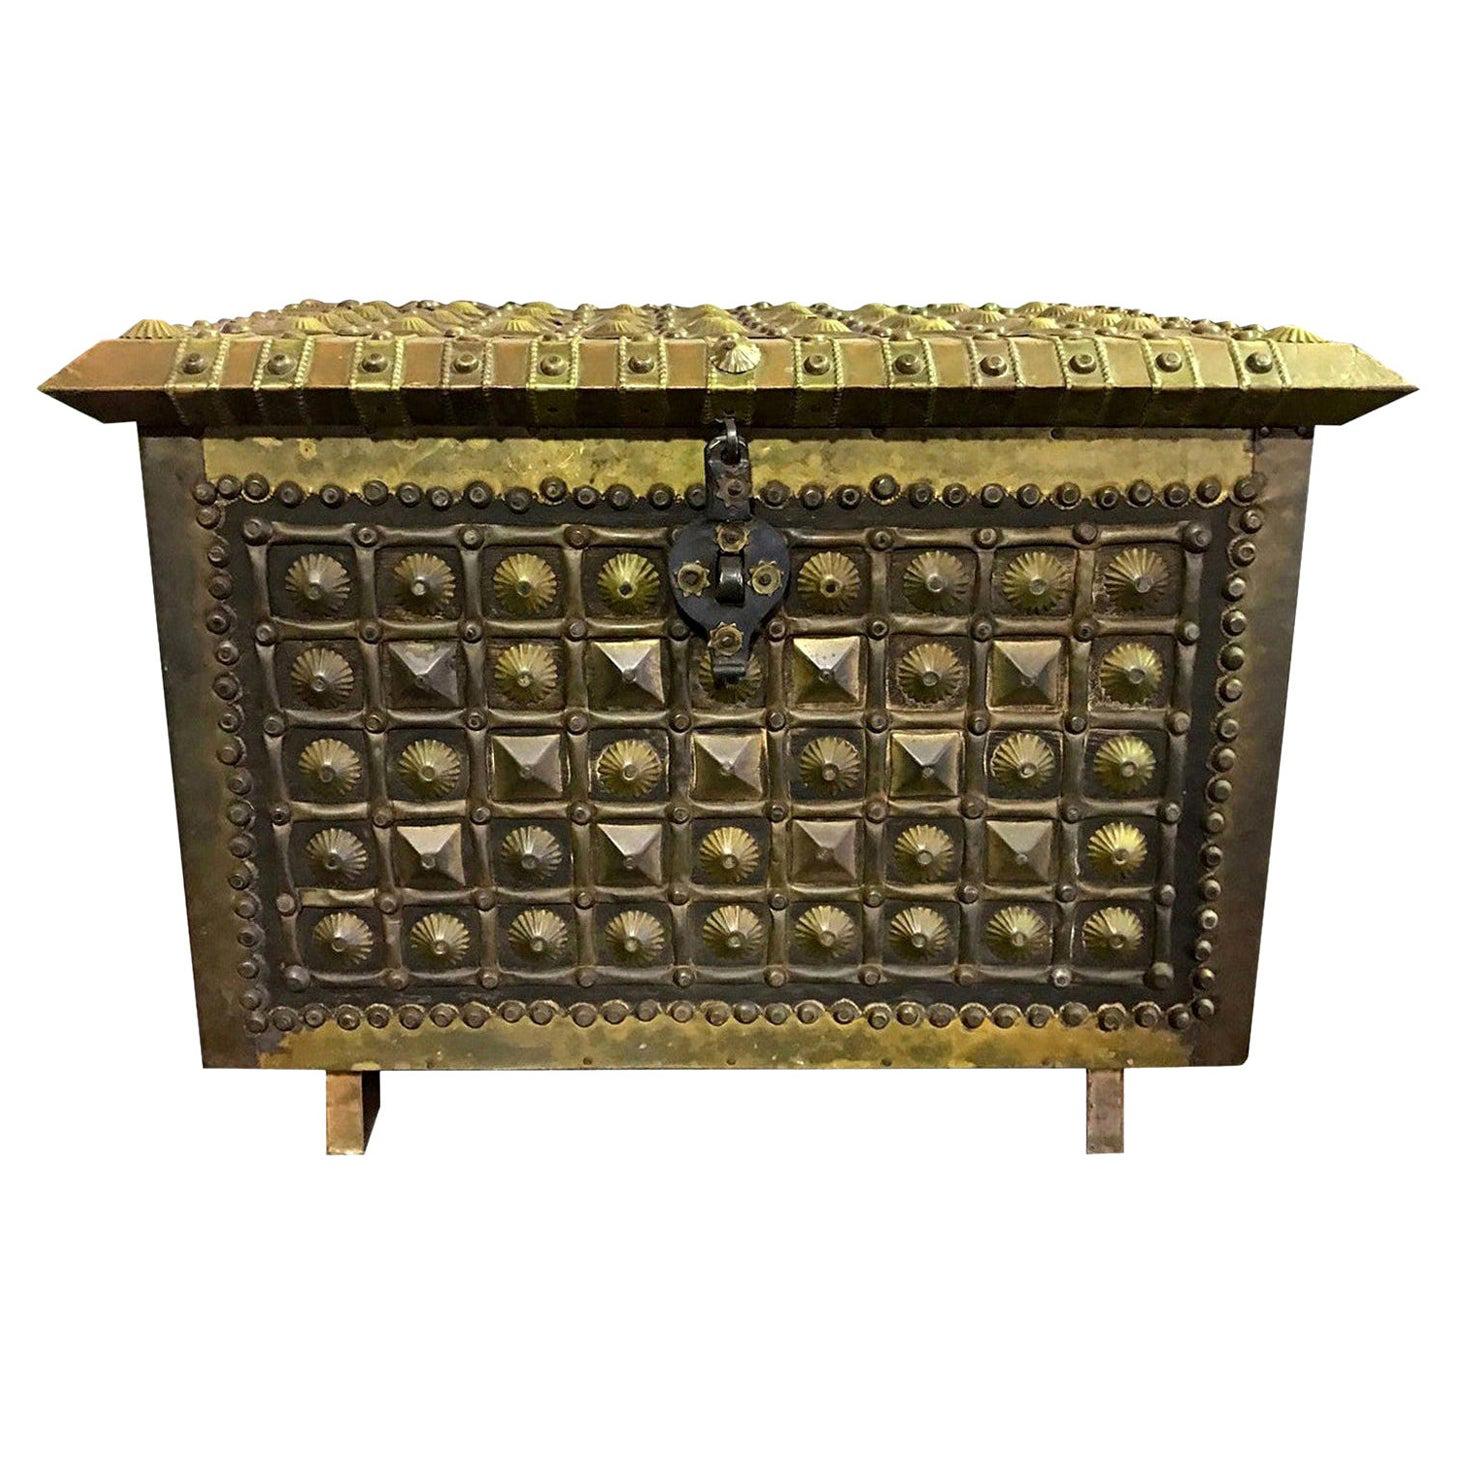 North African Moorish Wood and Hammered Brass Decorated Box Coffer